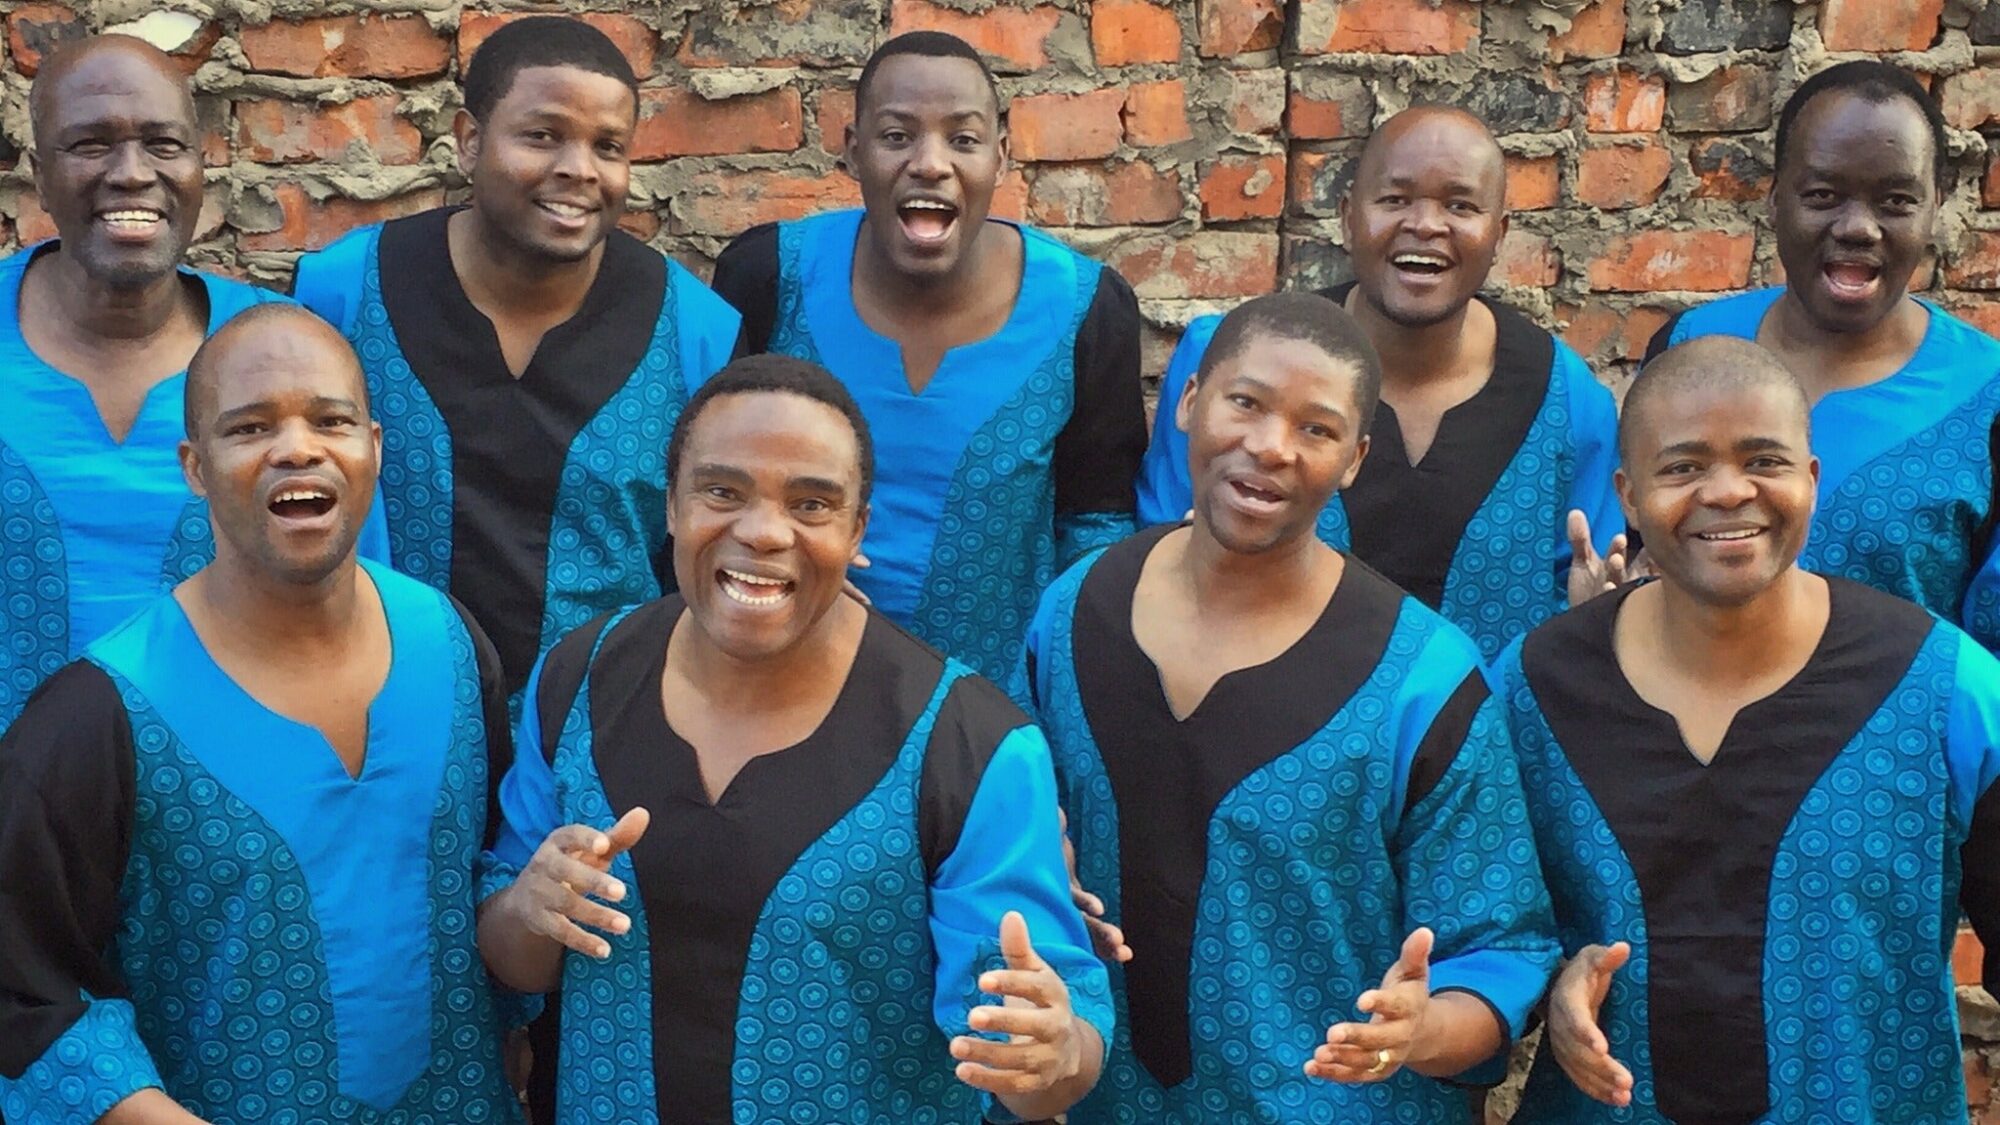 Image name Ladysmith Black Mambazo at Grand Opera House York York the 26 image from the post Events in Yorkshire.com.